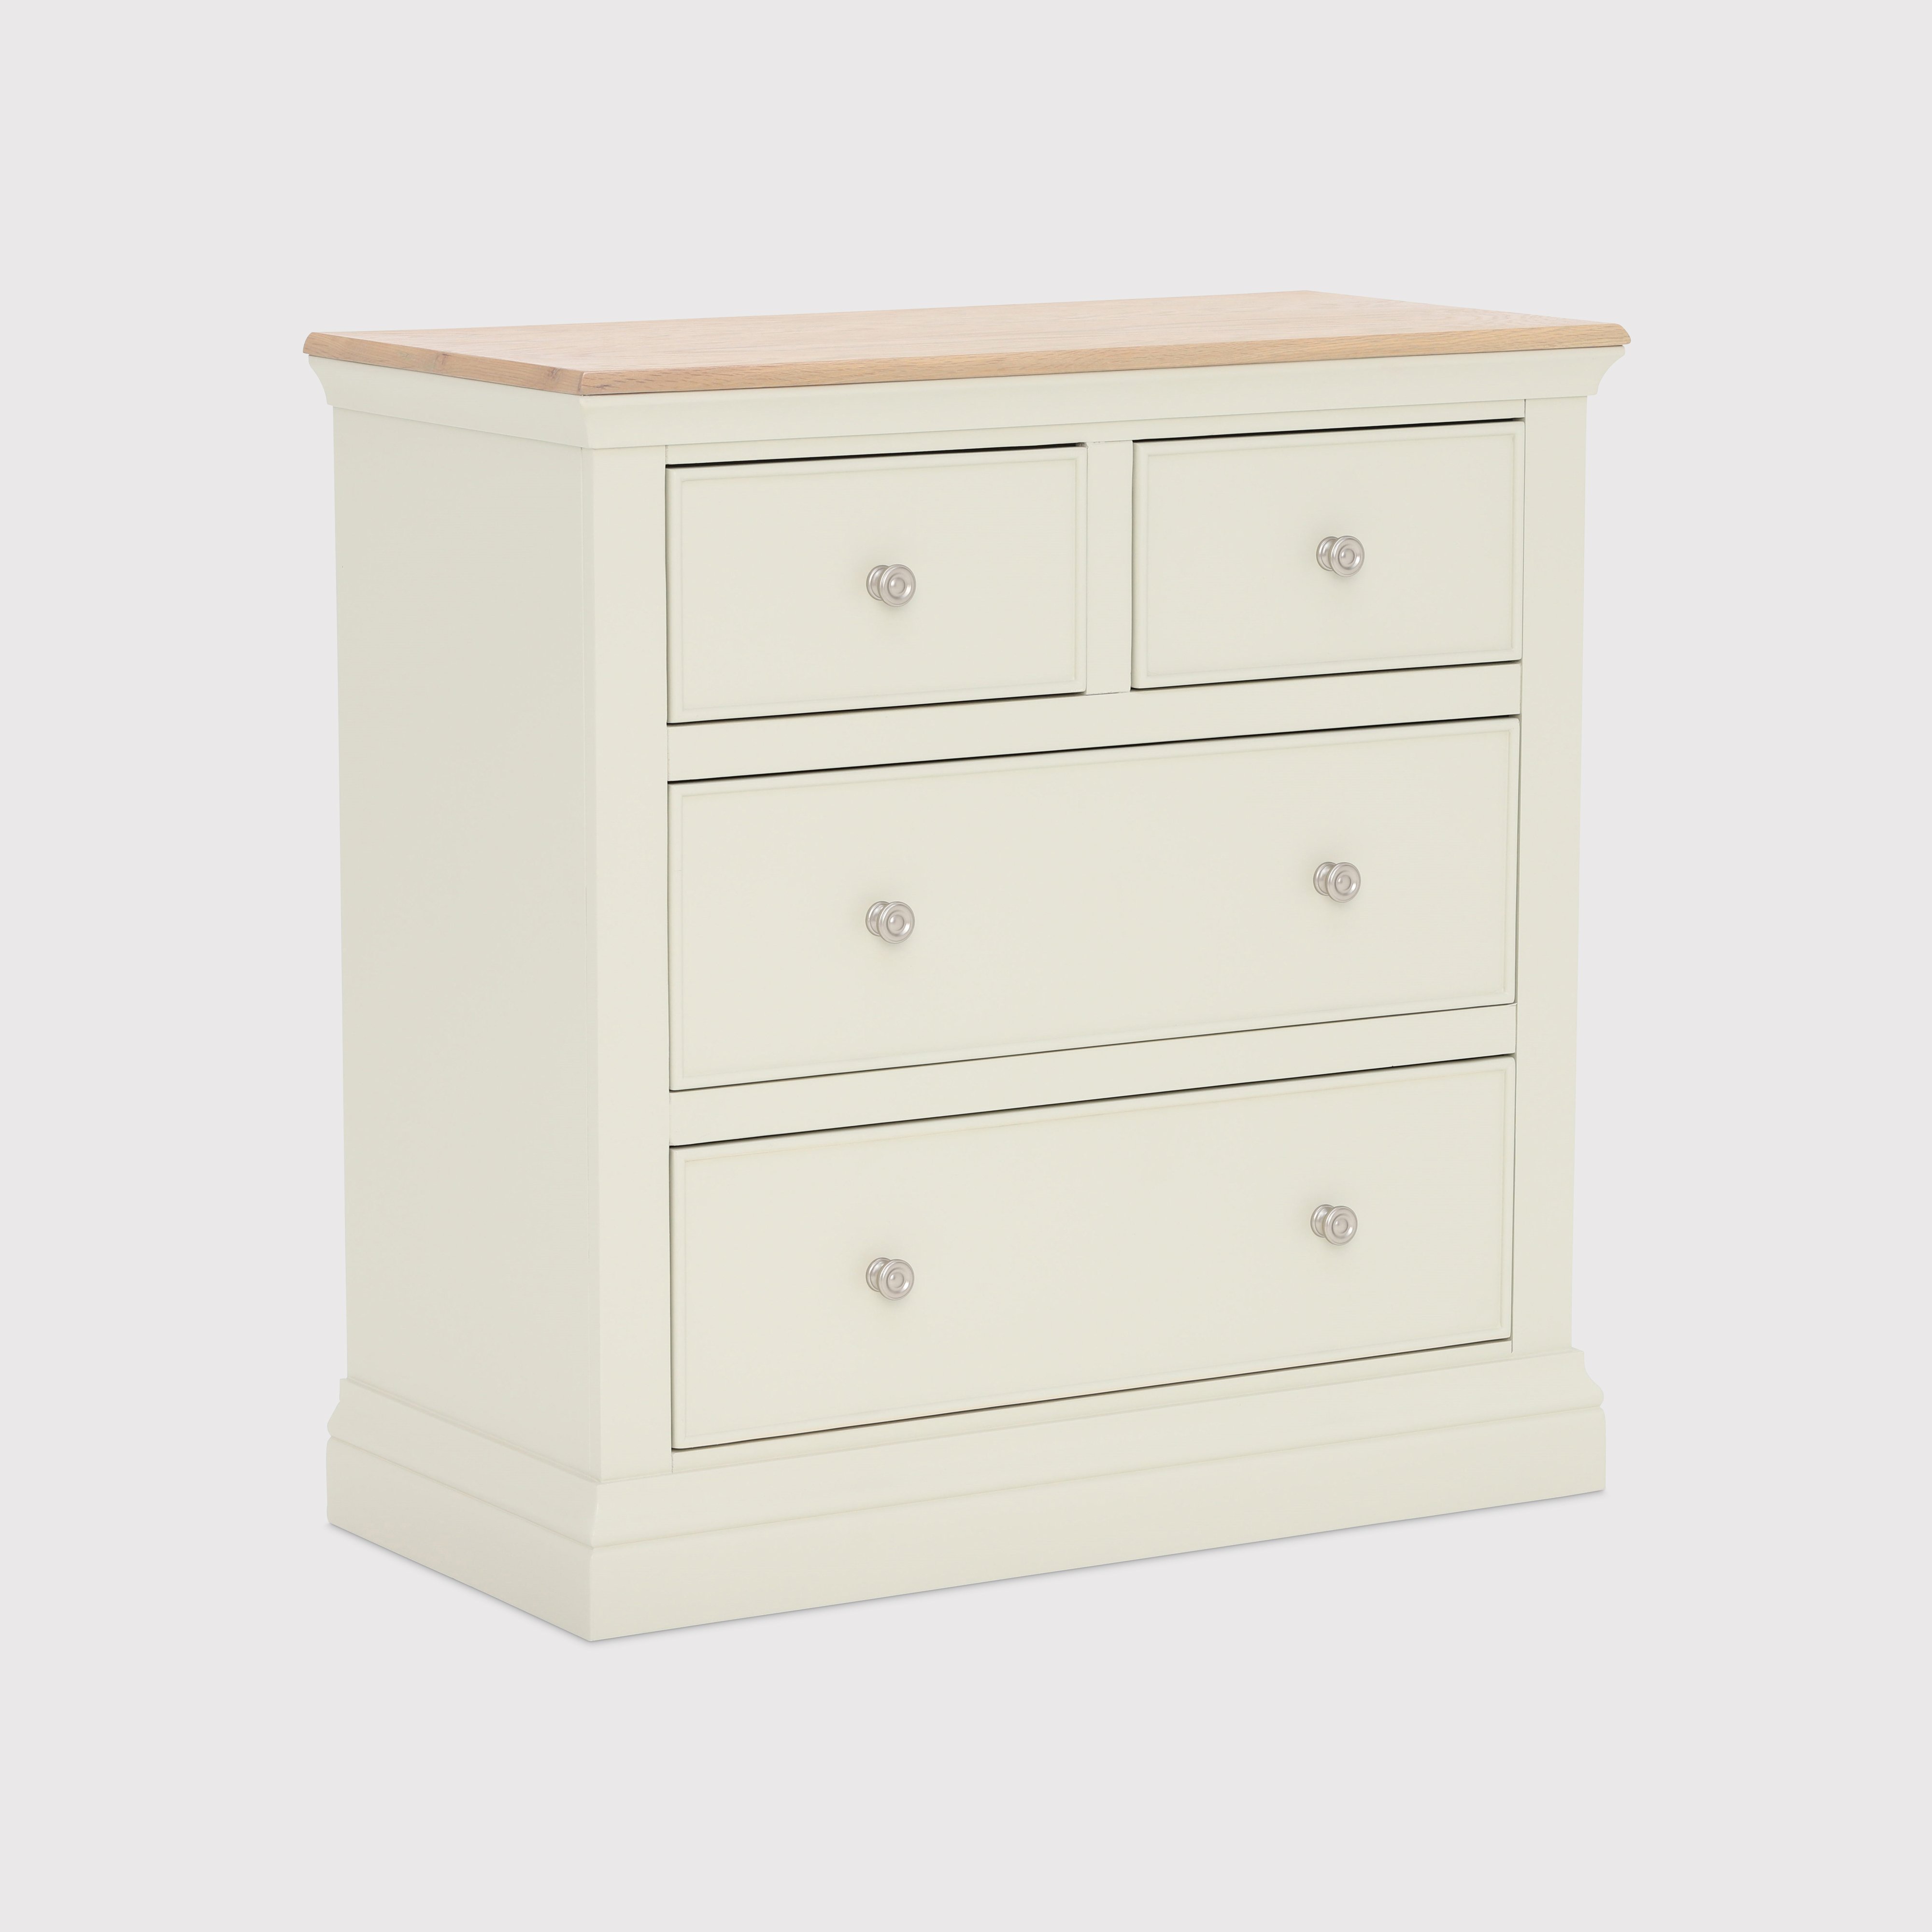 Staithes 2 Over 2 Drawer Chest, Neutral Oak | Barker & Stonehouse